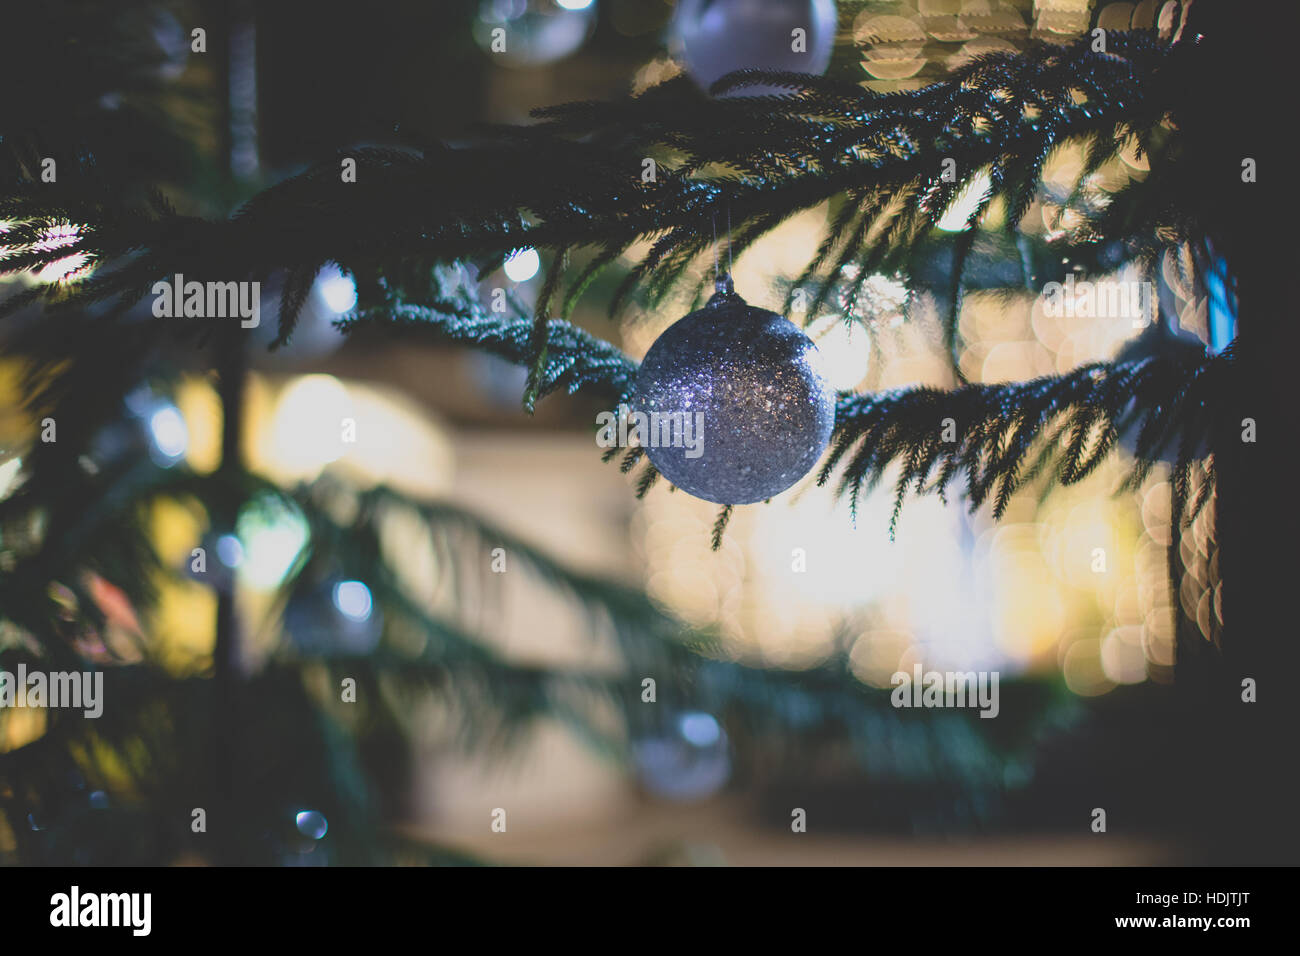 Background of Christmas tree with vintage film look. Stock Photo